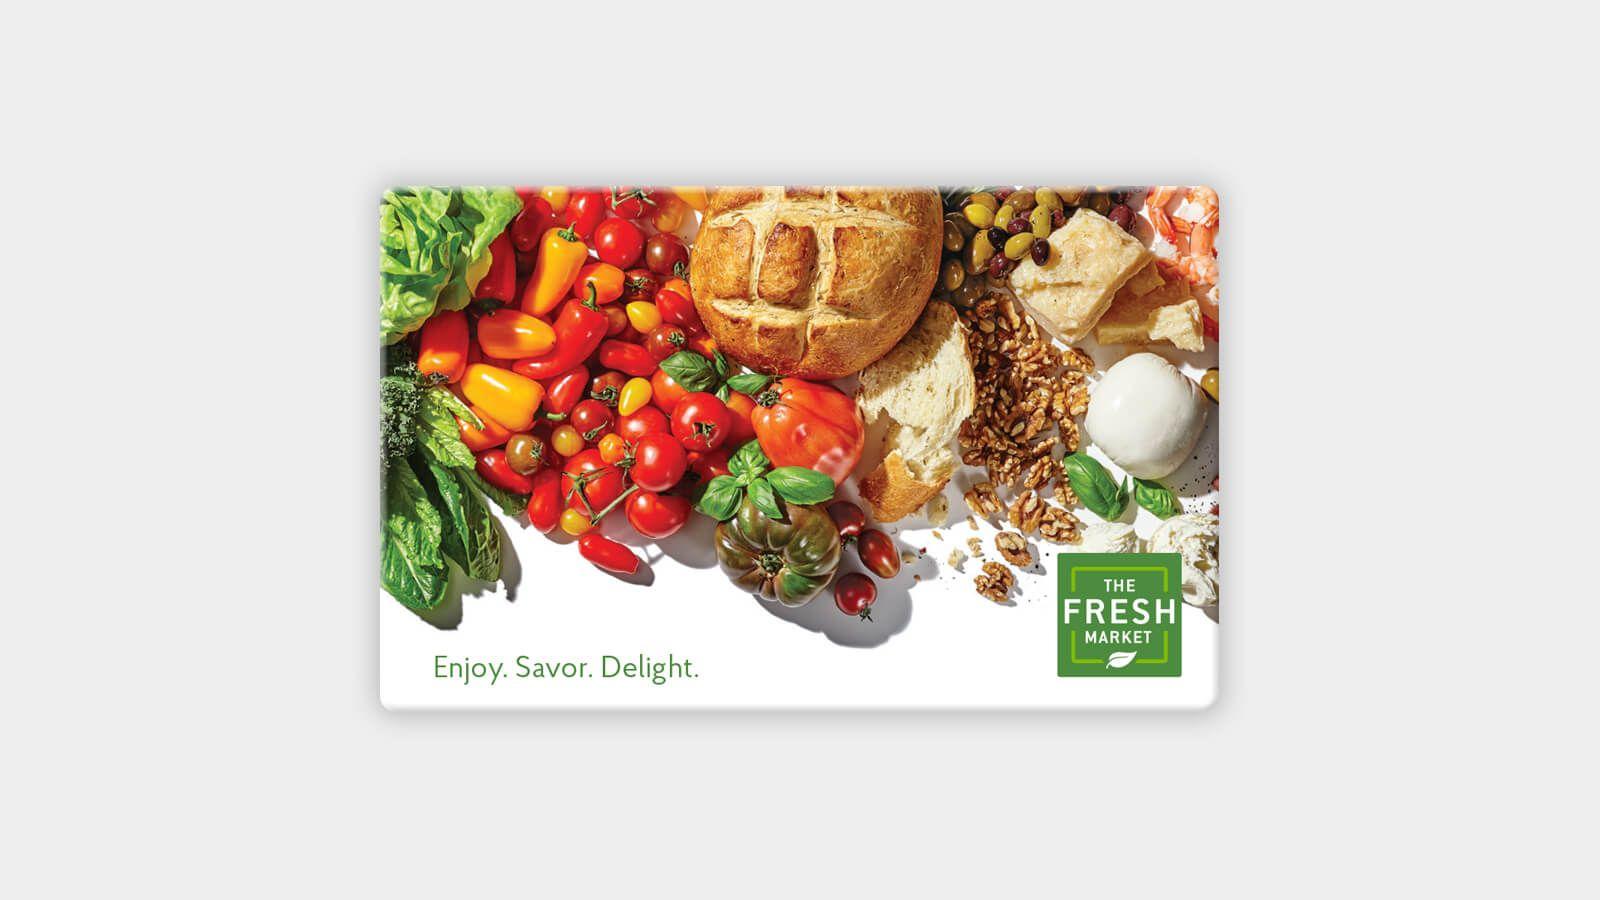 The Fresh Market Logo - The Fresh Market Gift Card - gifts - Delivery - The Fresh Market ...